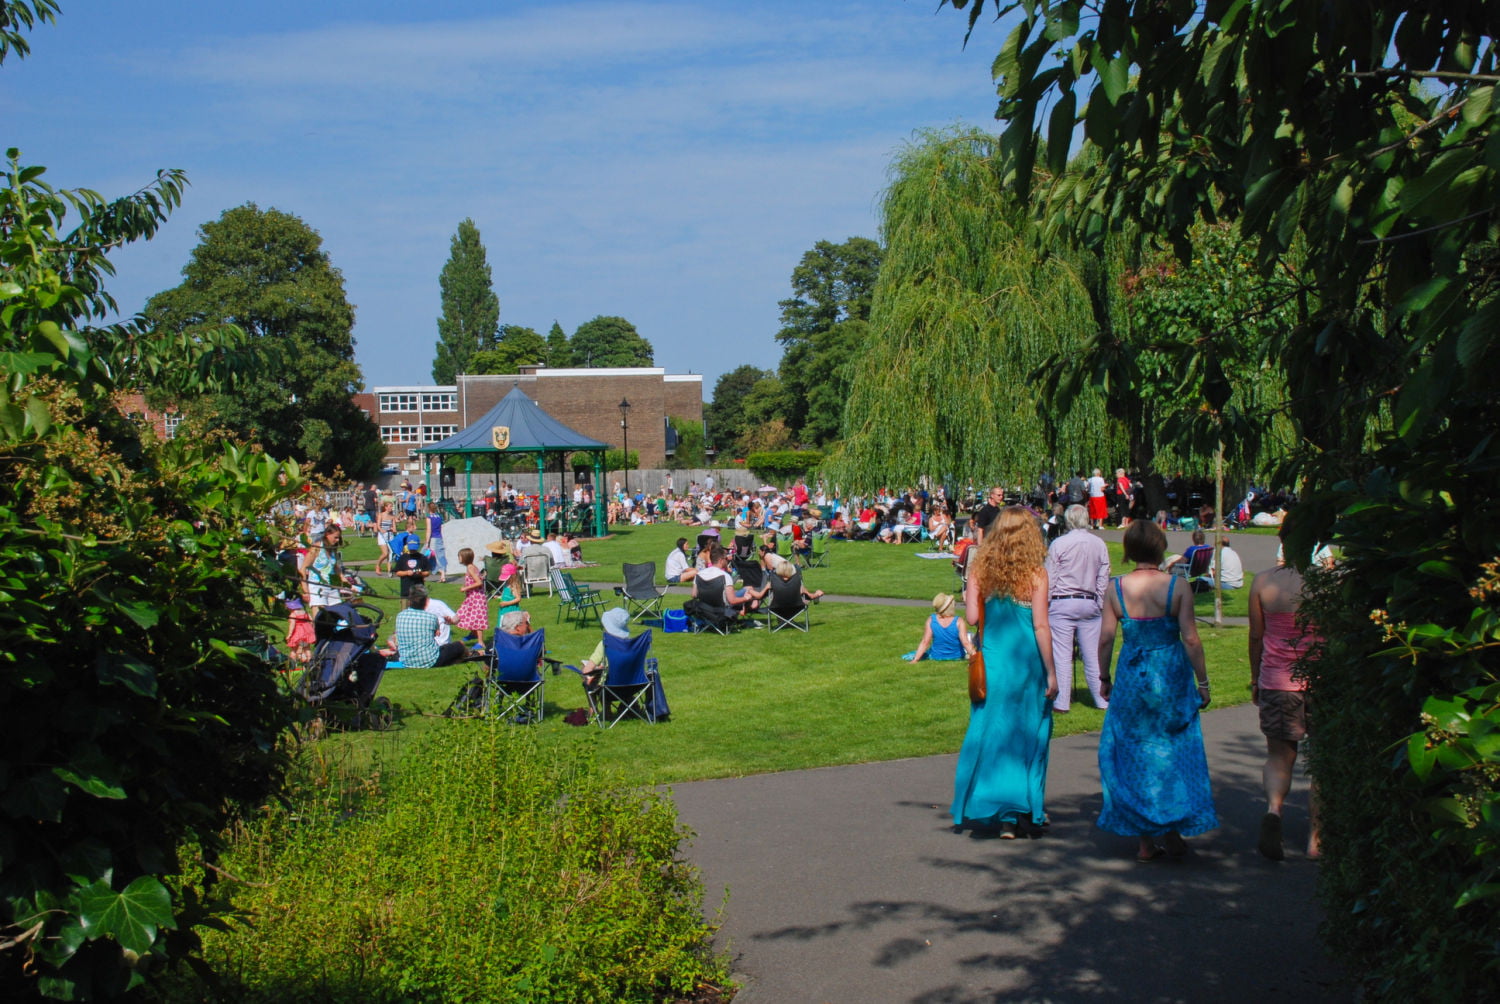 people sitting in park, bandstand